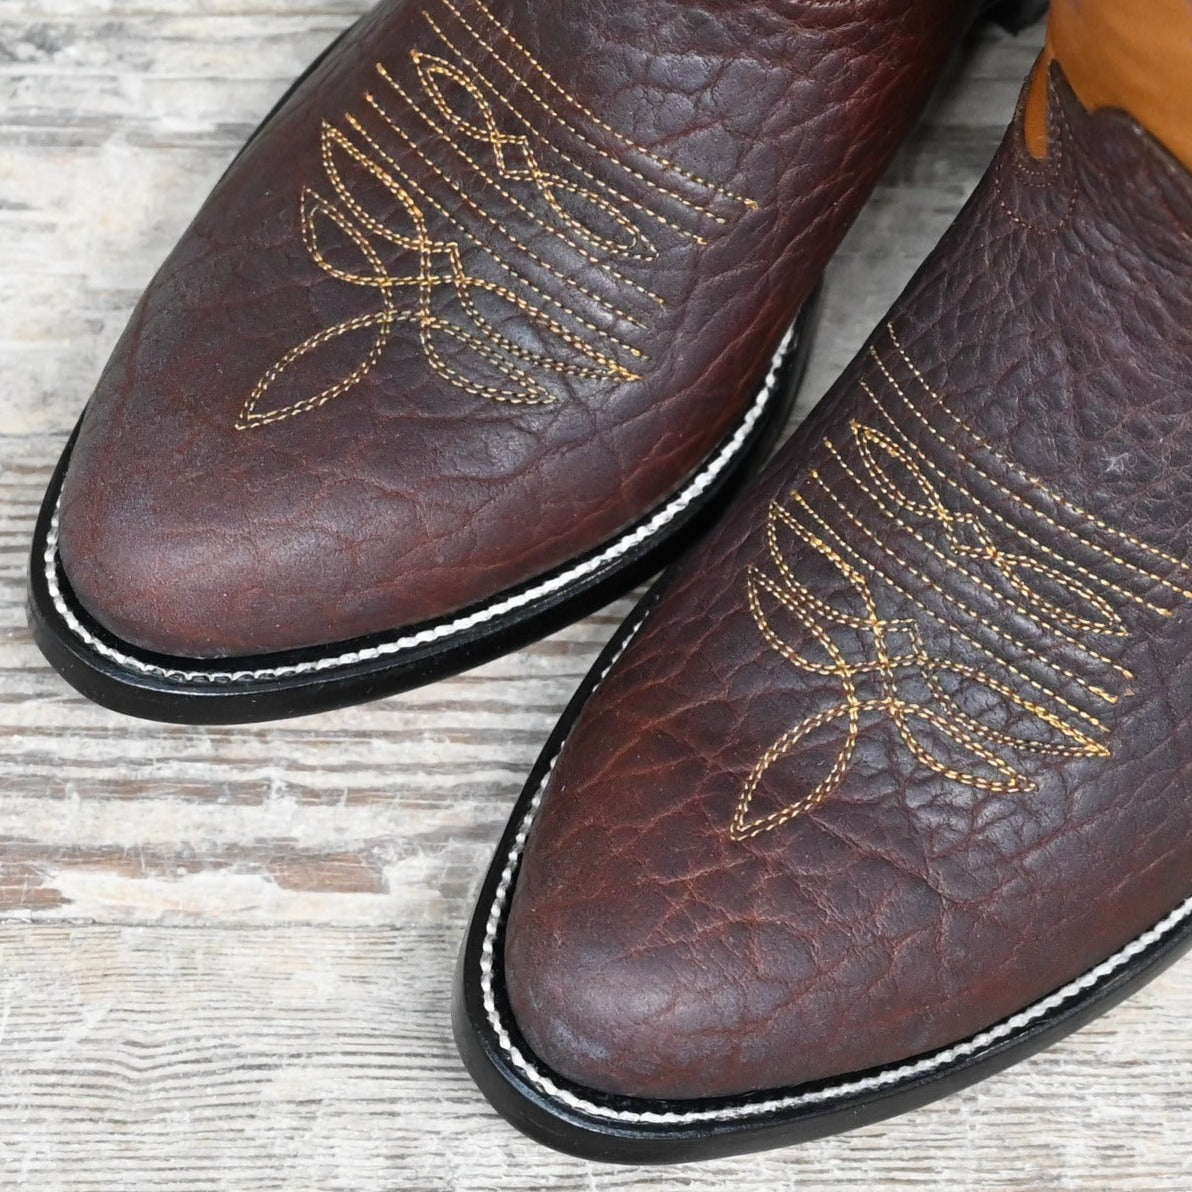 Nutted Calf Cognac Bison Boot on Custom &quot;Duke&quot; Last view of toe